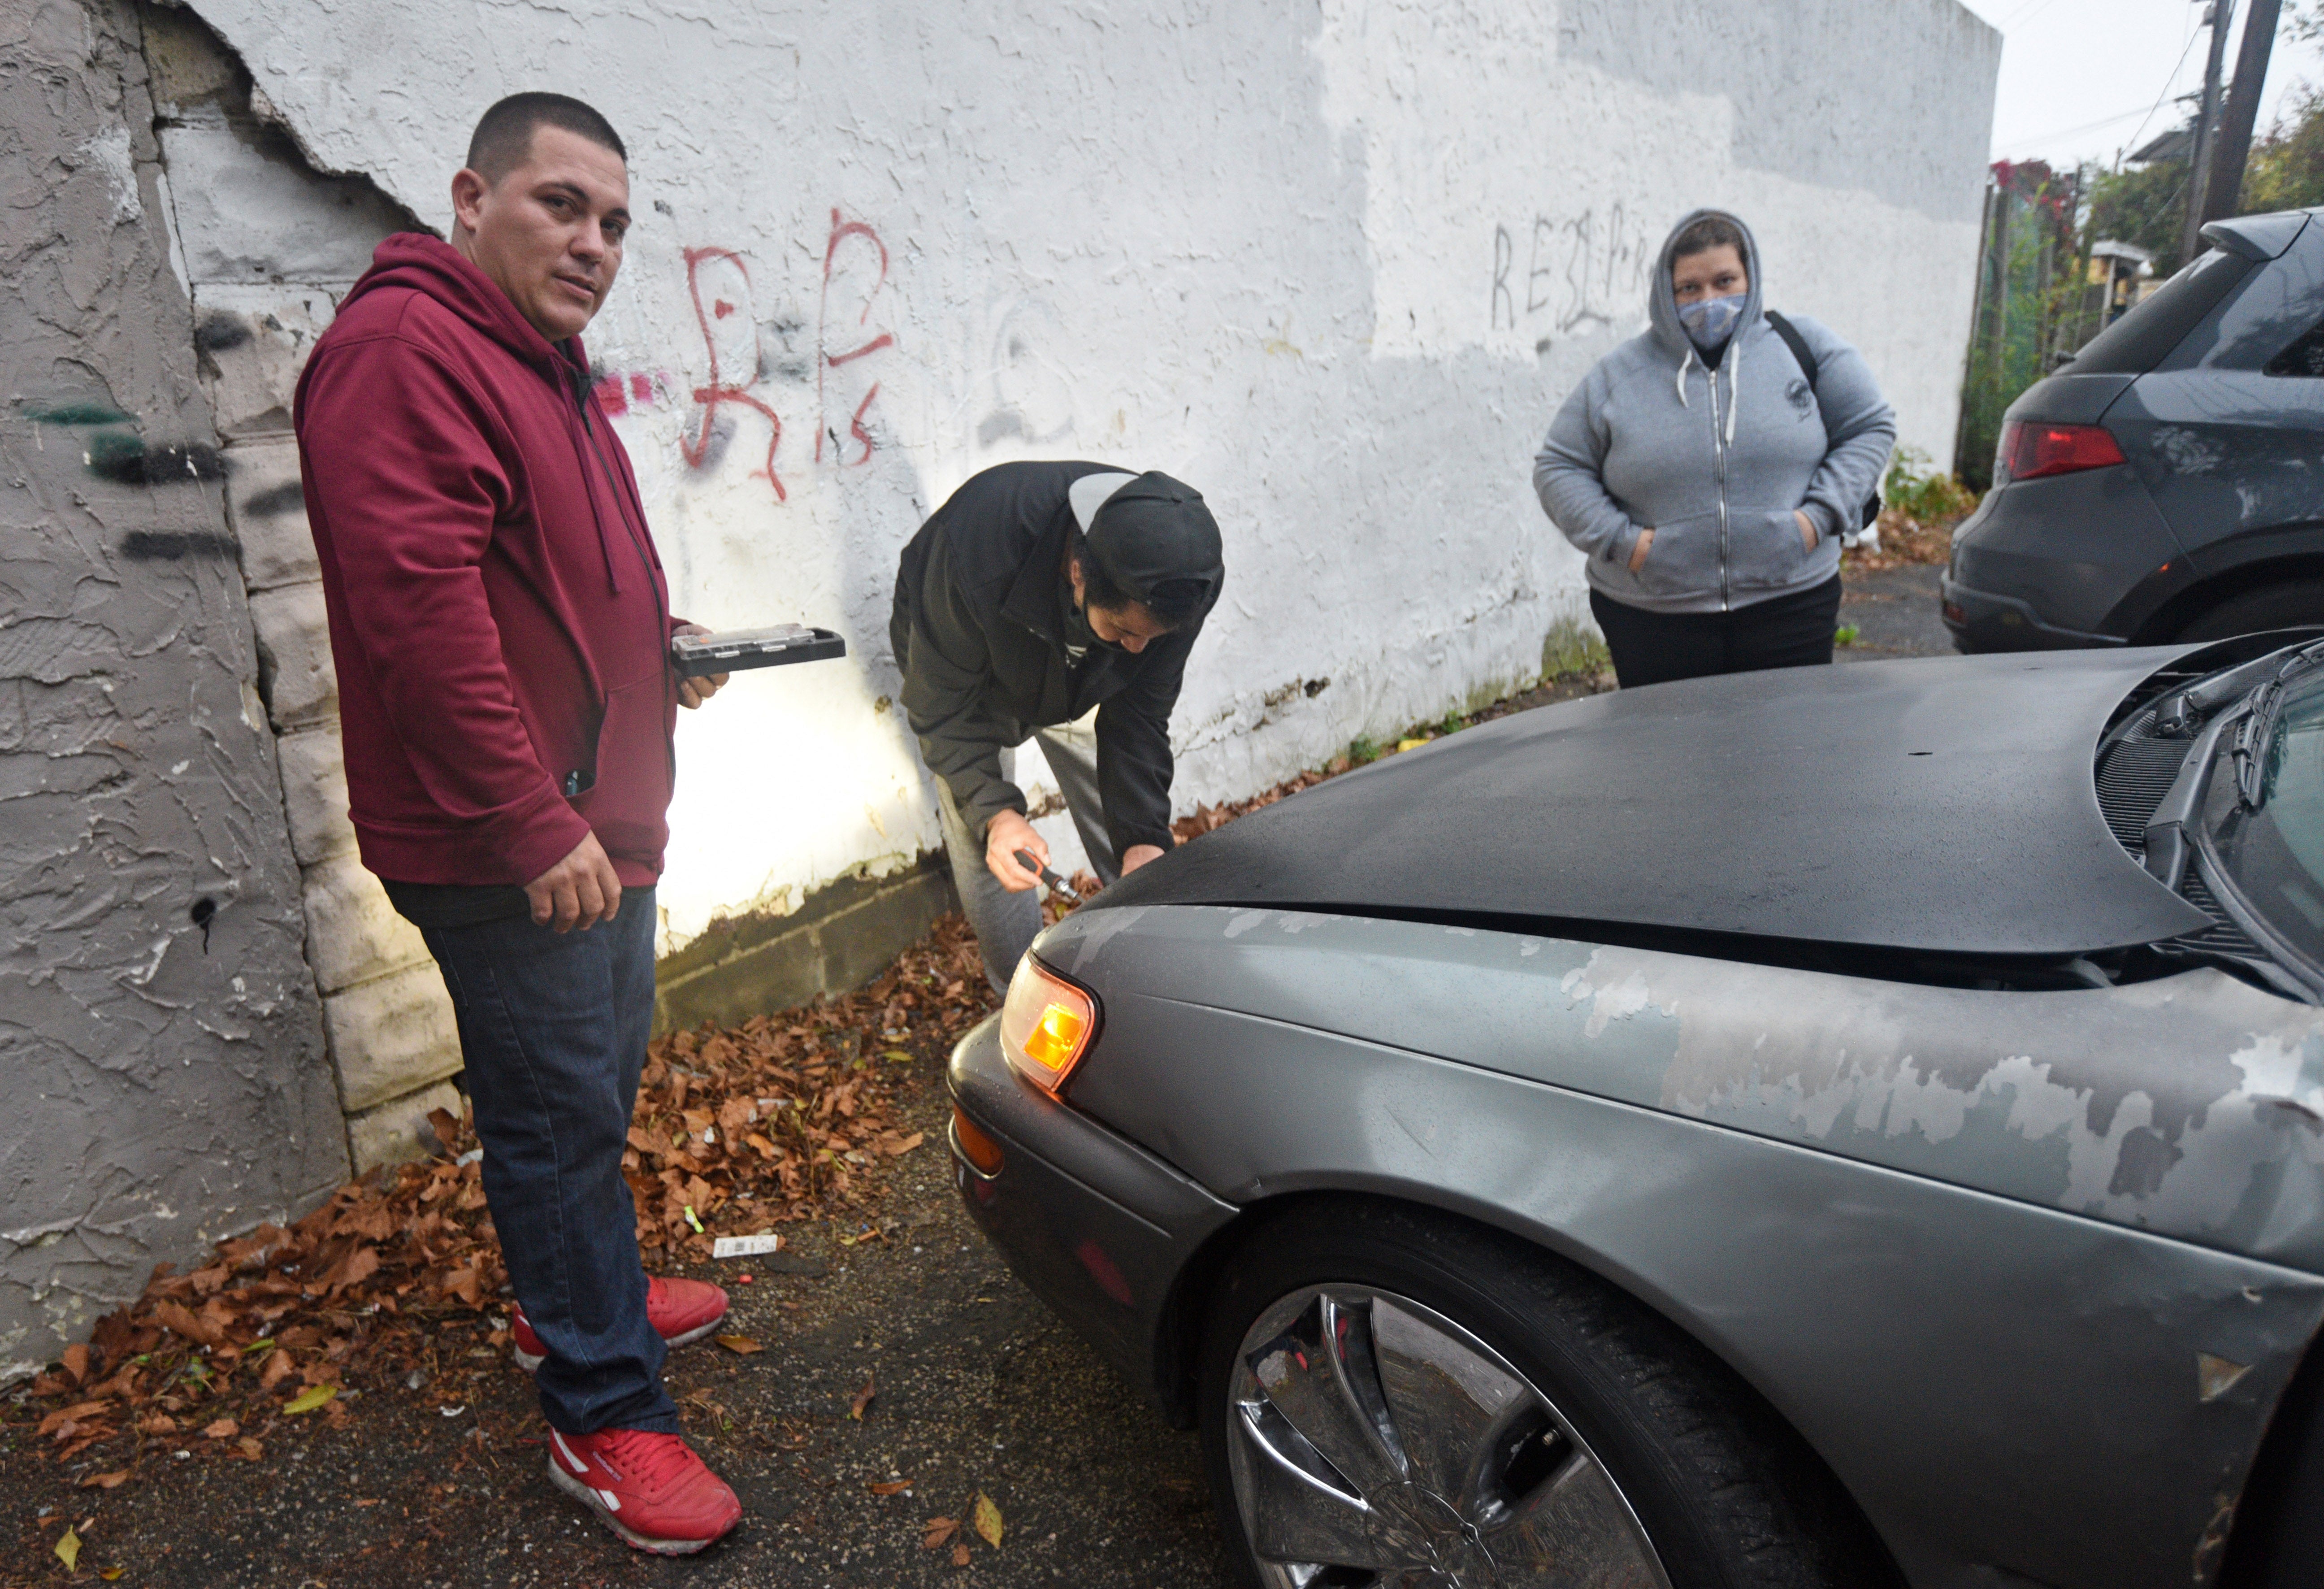 At the Cra-West Apartments in Camden on Oct. 26, tenant Juan Cruz Cardona (left) sells his Toyota Corolla for $1,000 because he needed the cash after the Oct. 25 fire gutted the building, forcing him to move.